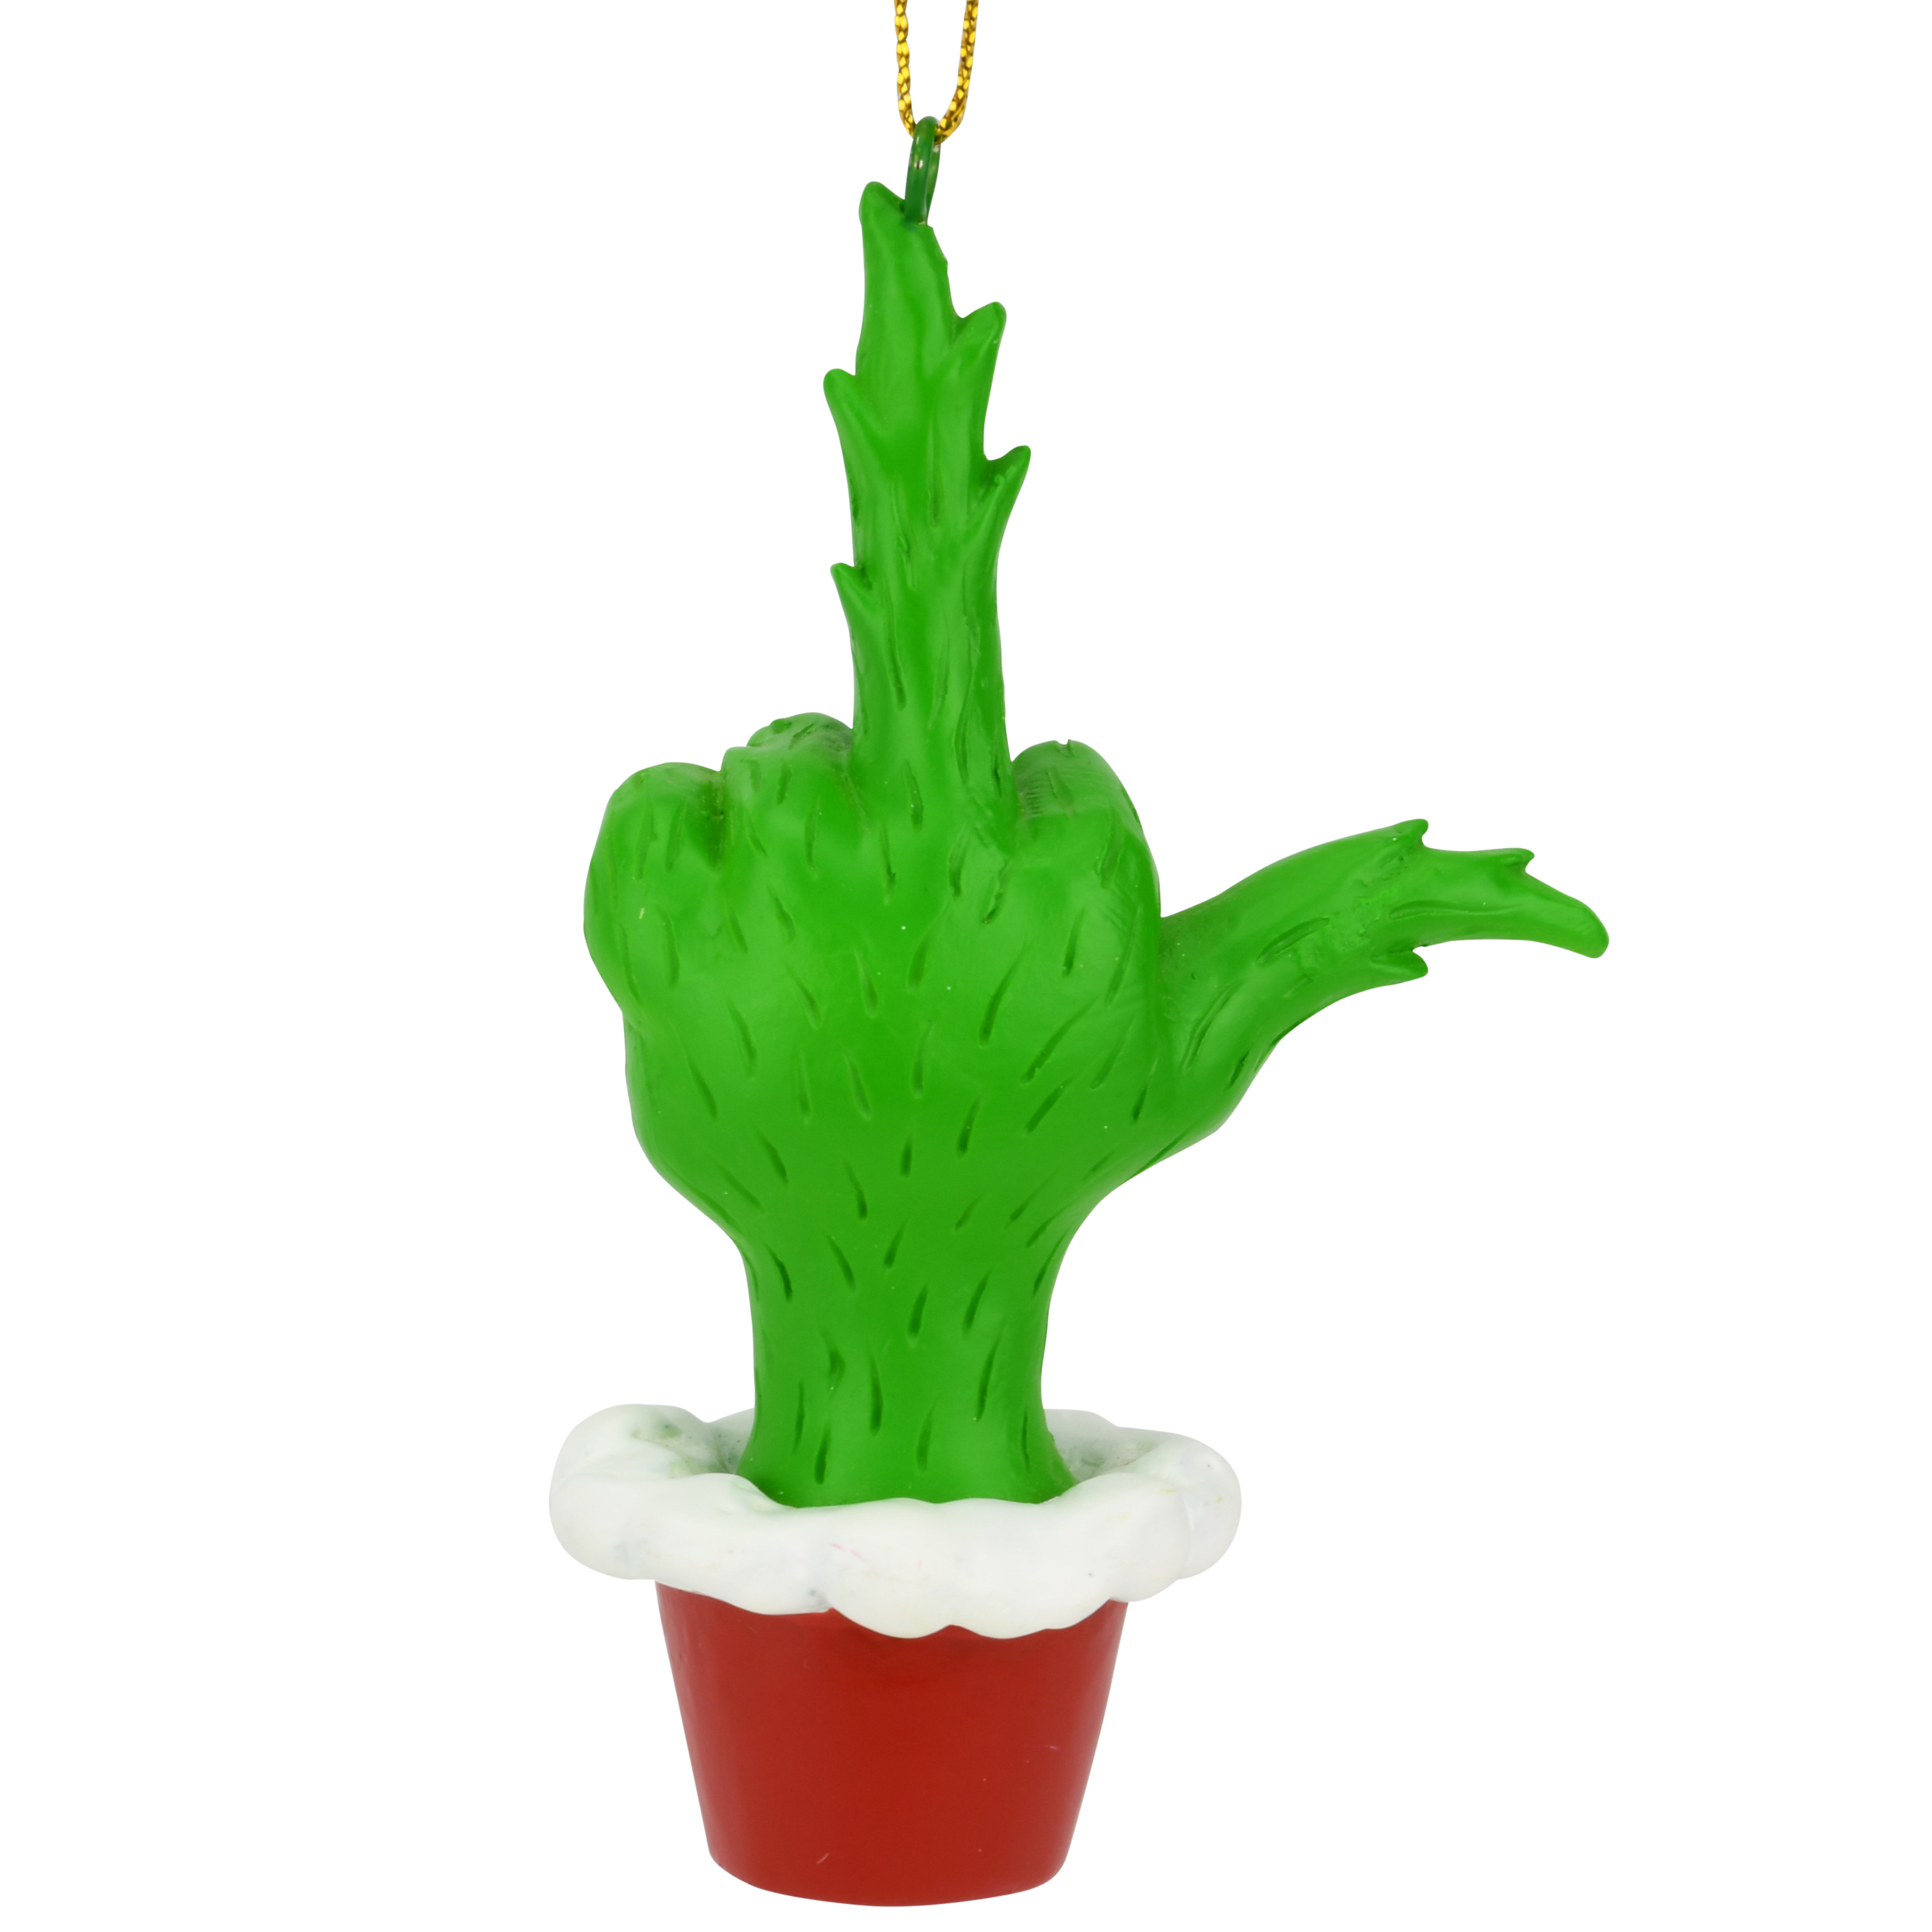 Green Hand Giving the Middle Finger Naughty Christmas Ornament